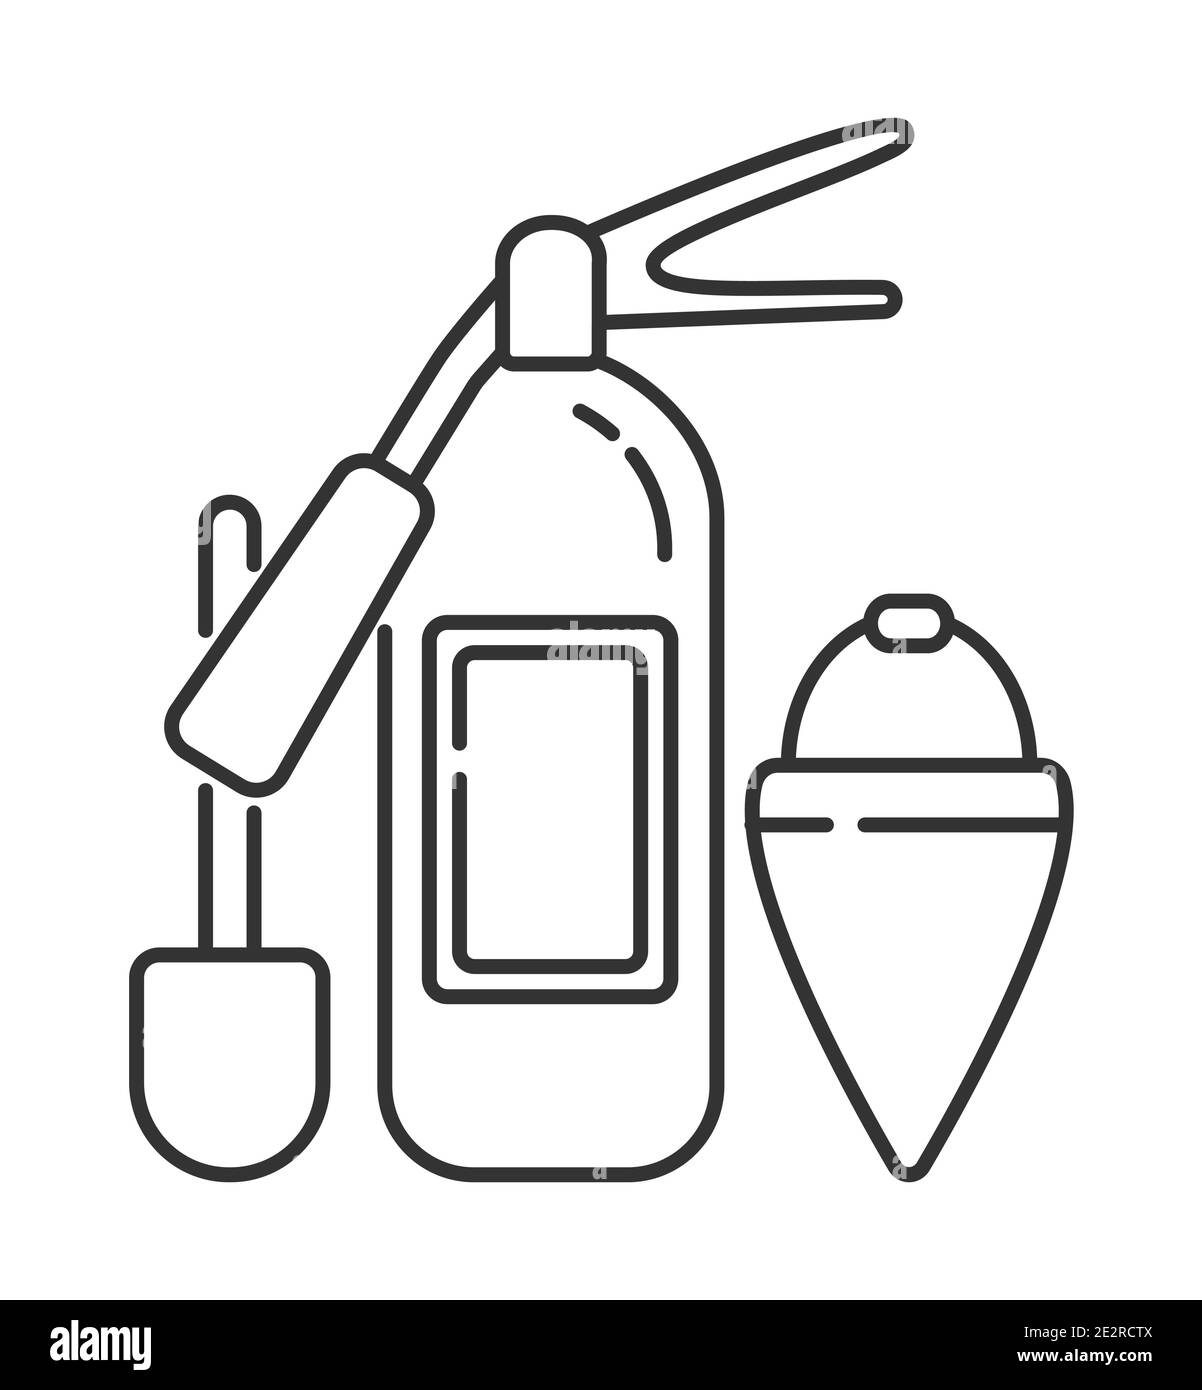 Fire extinguisher icon vector in outline style. Elements of extinguish fire, shovel, flare bucket are shown. Stock Vector